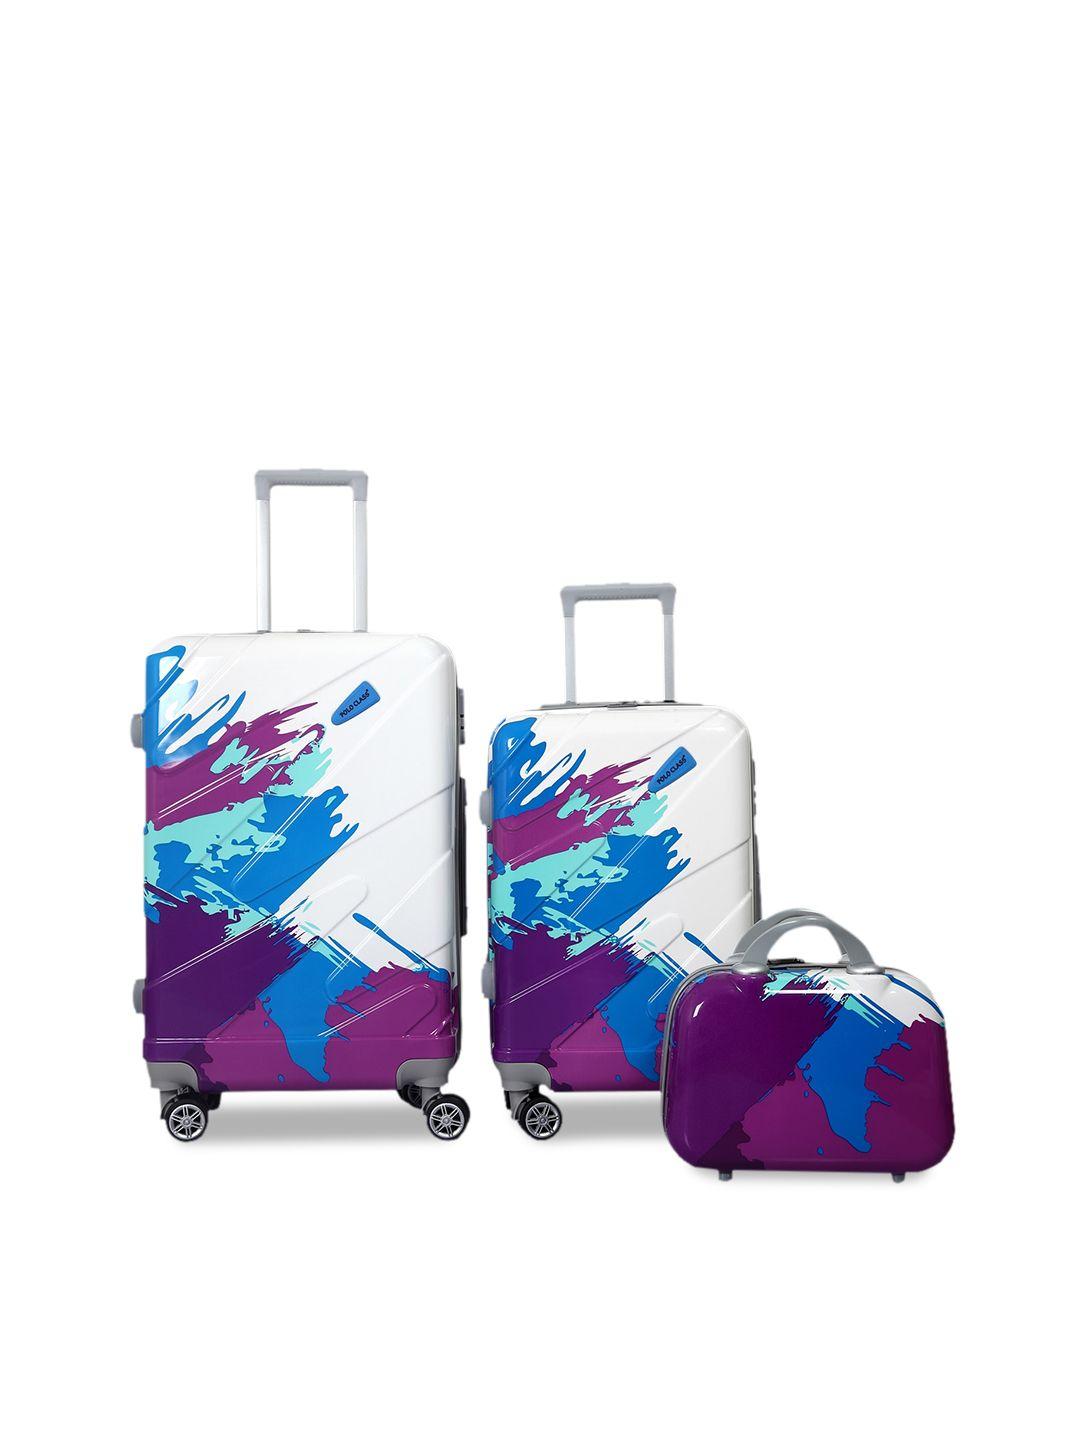 polo class set of 3 hard-sided trolley suitcases & vanity bag